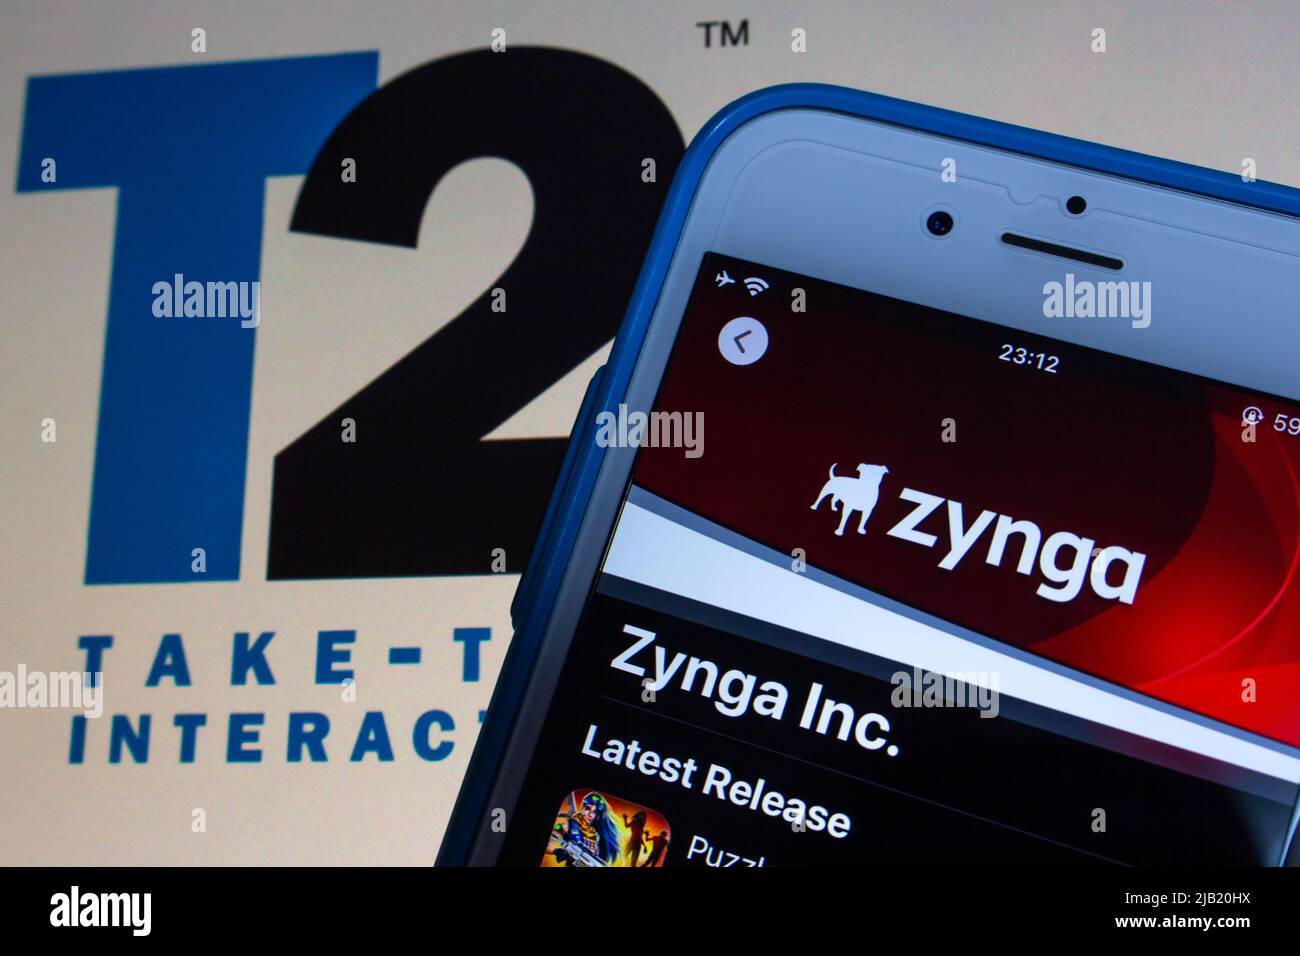 An US social game developer Zynga Inc. on App Sore on iPhone and Take-Two Interactive logo. Take-Two announced its intent to acquire Zynga in Jan 2022 Stock Photo